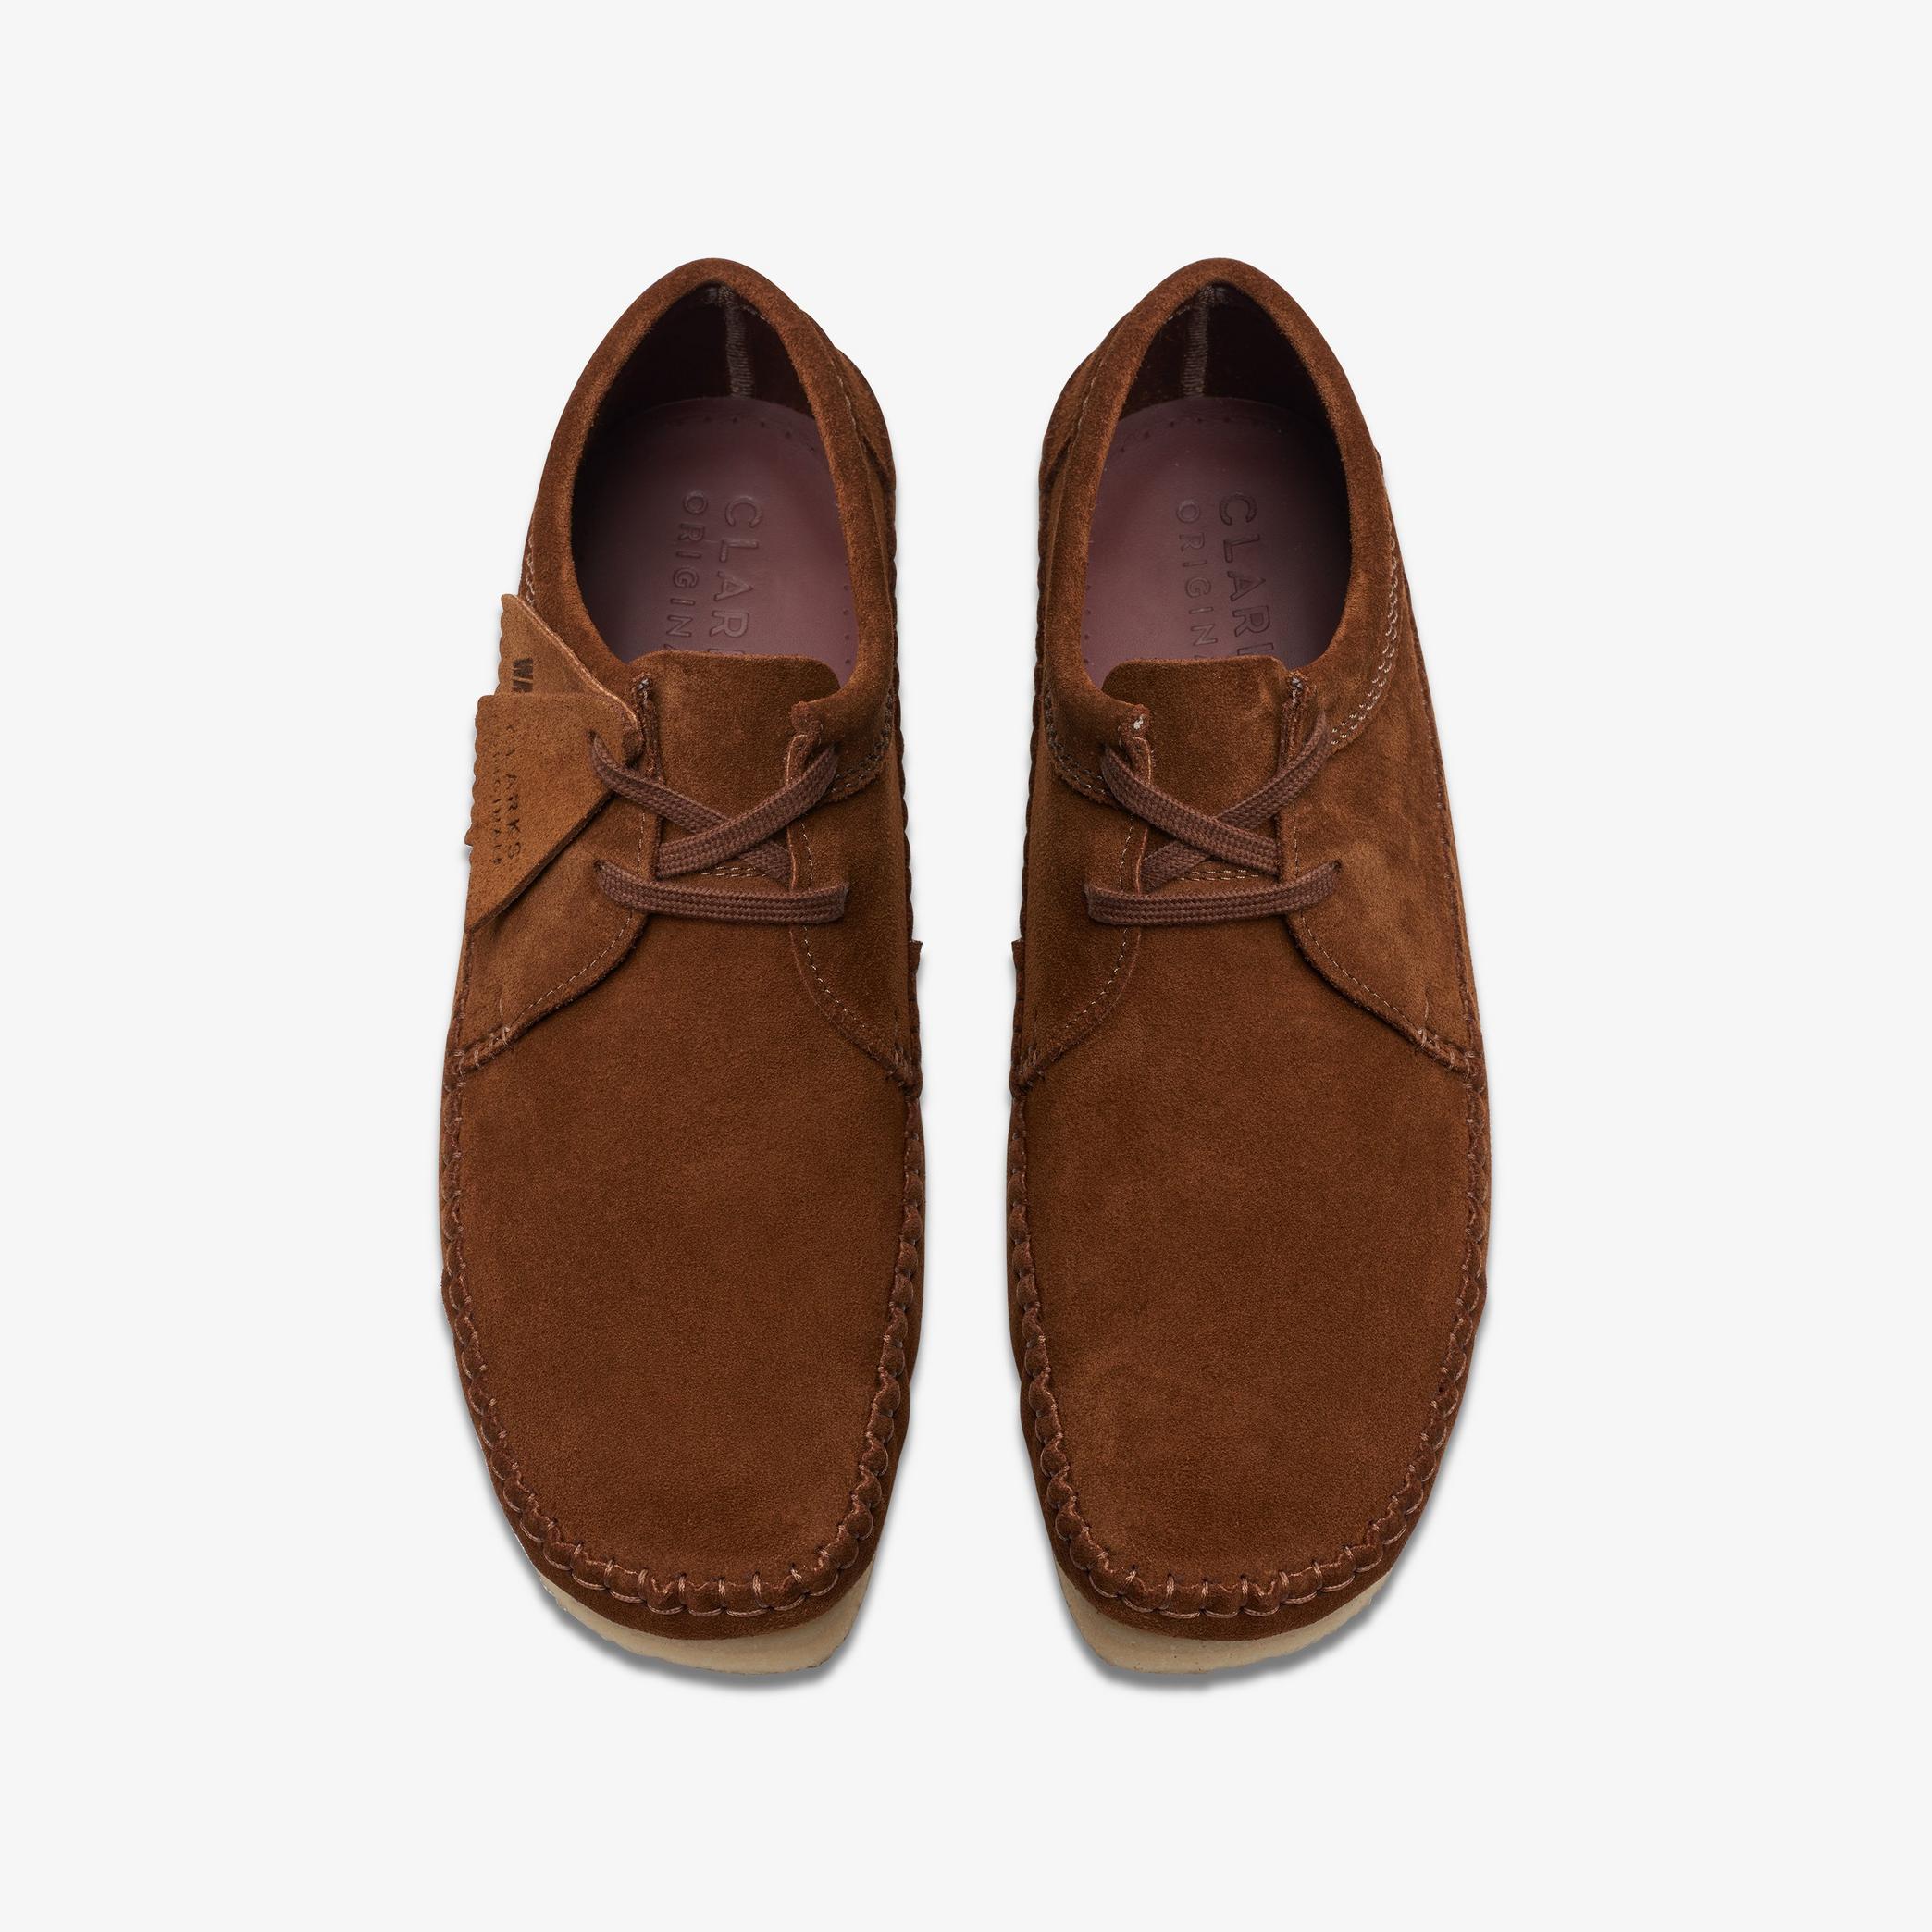 Weaver Cola Suede Moccasins, view 6 of 7